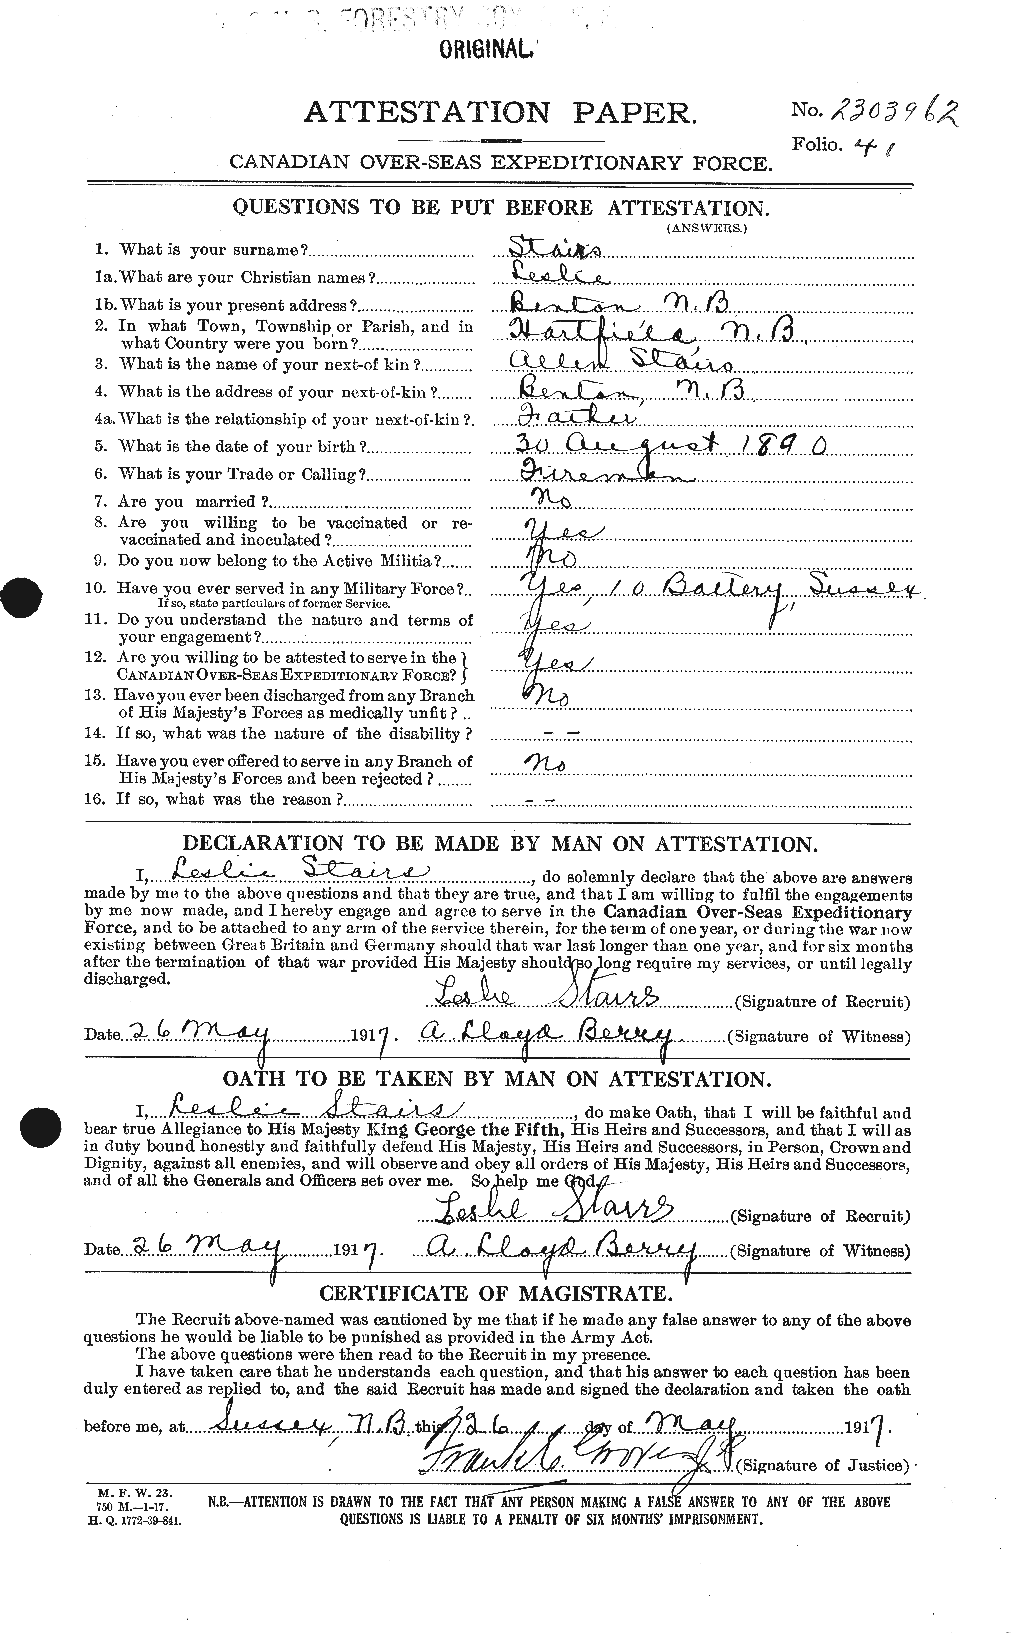 Personnel Records of the First World War - CEF 116799a